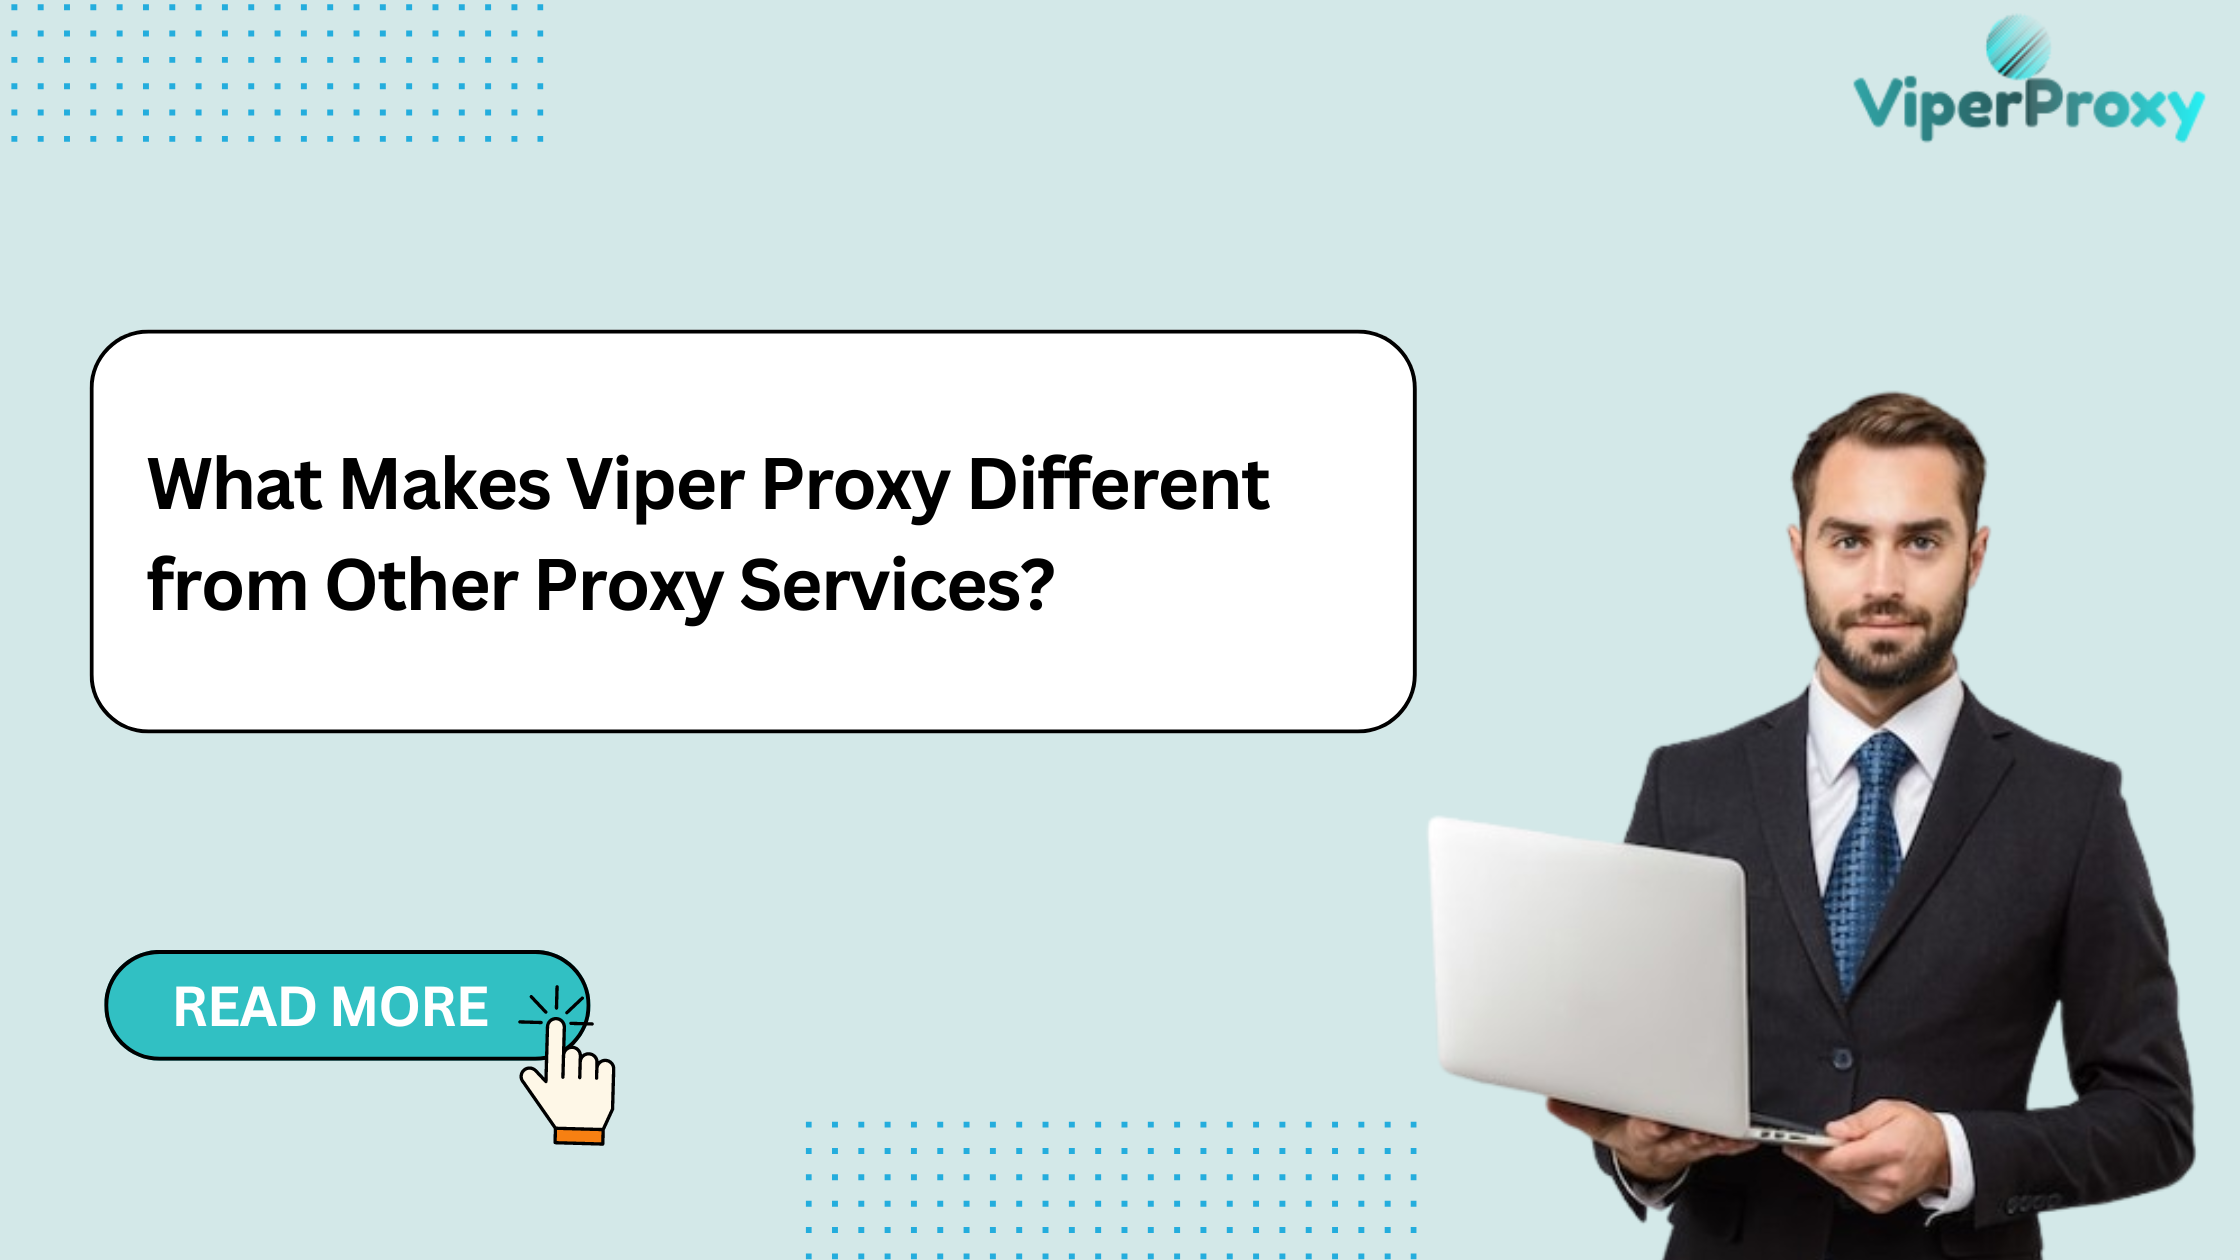 What Makes Viper Proxy Different from Other Proxy Services?